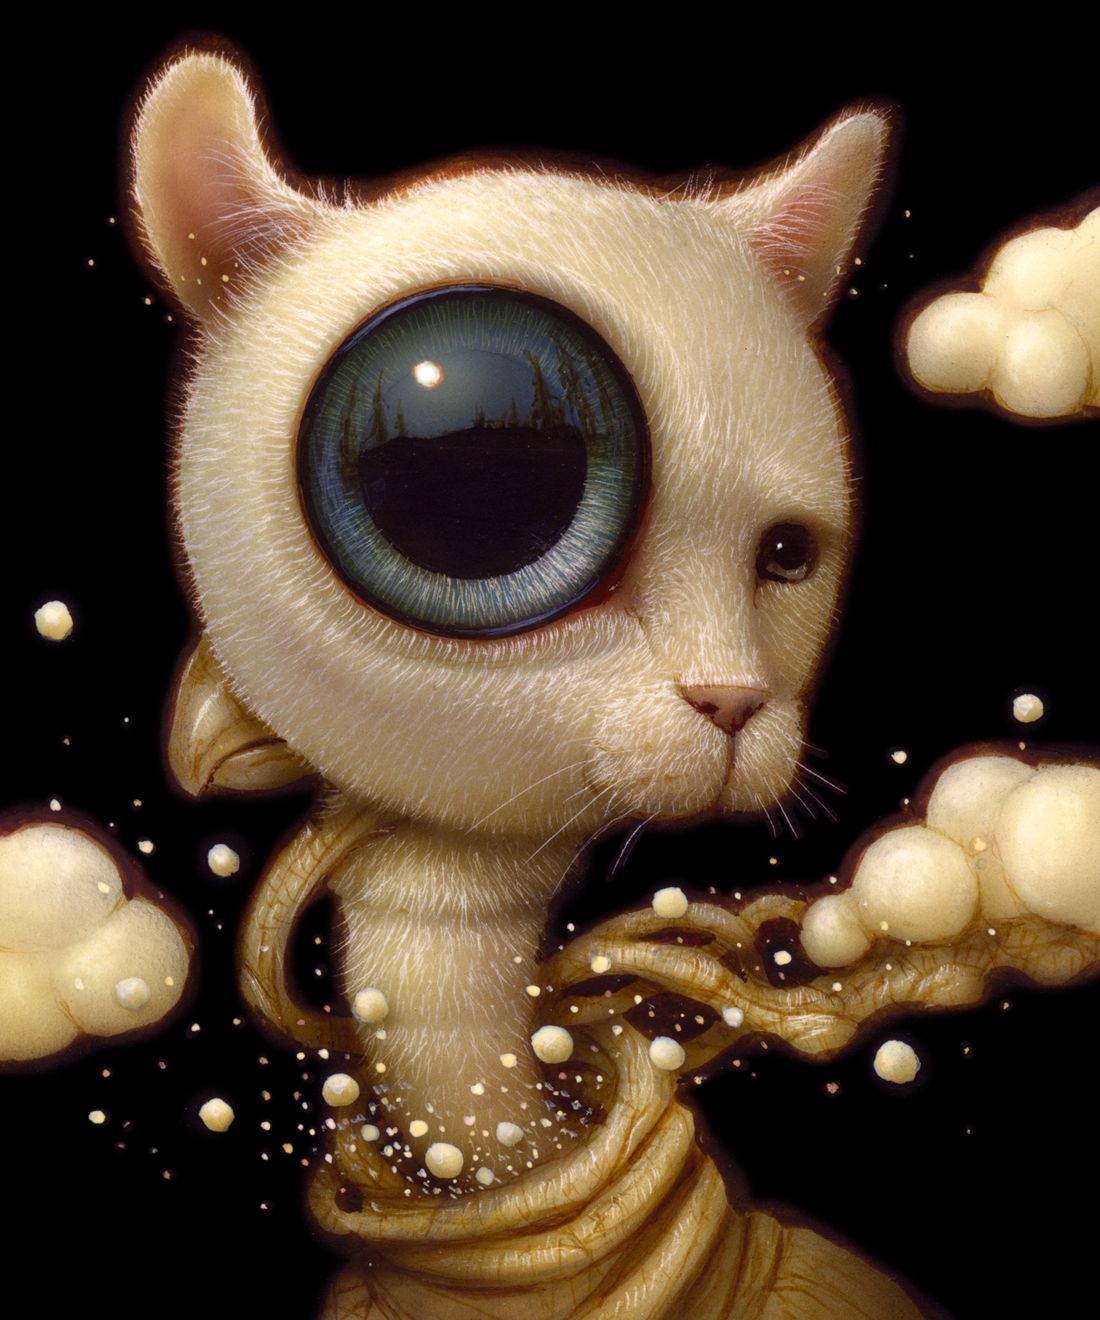 Quirky Fantastical Creatures With Oversized Eyes By Haoto Nattori 4